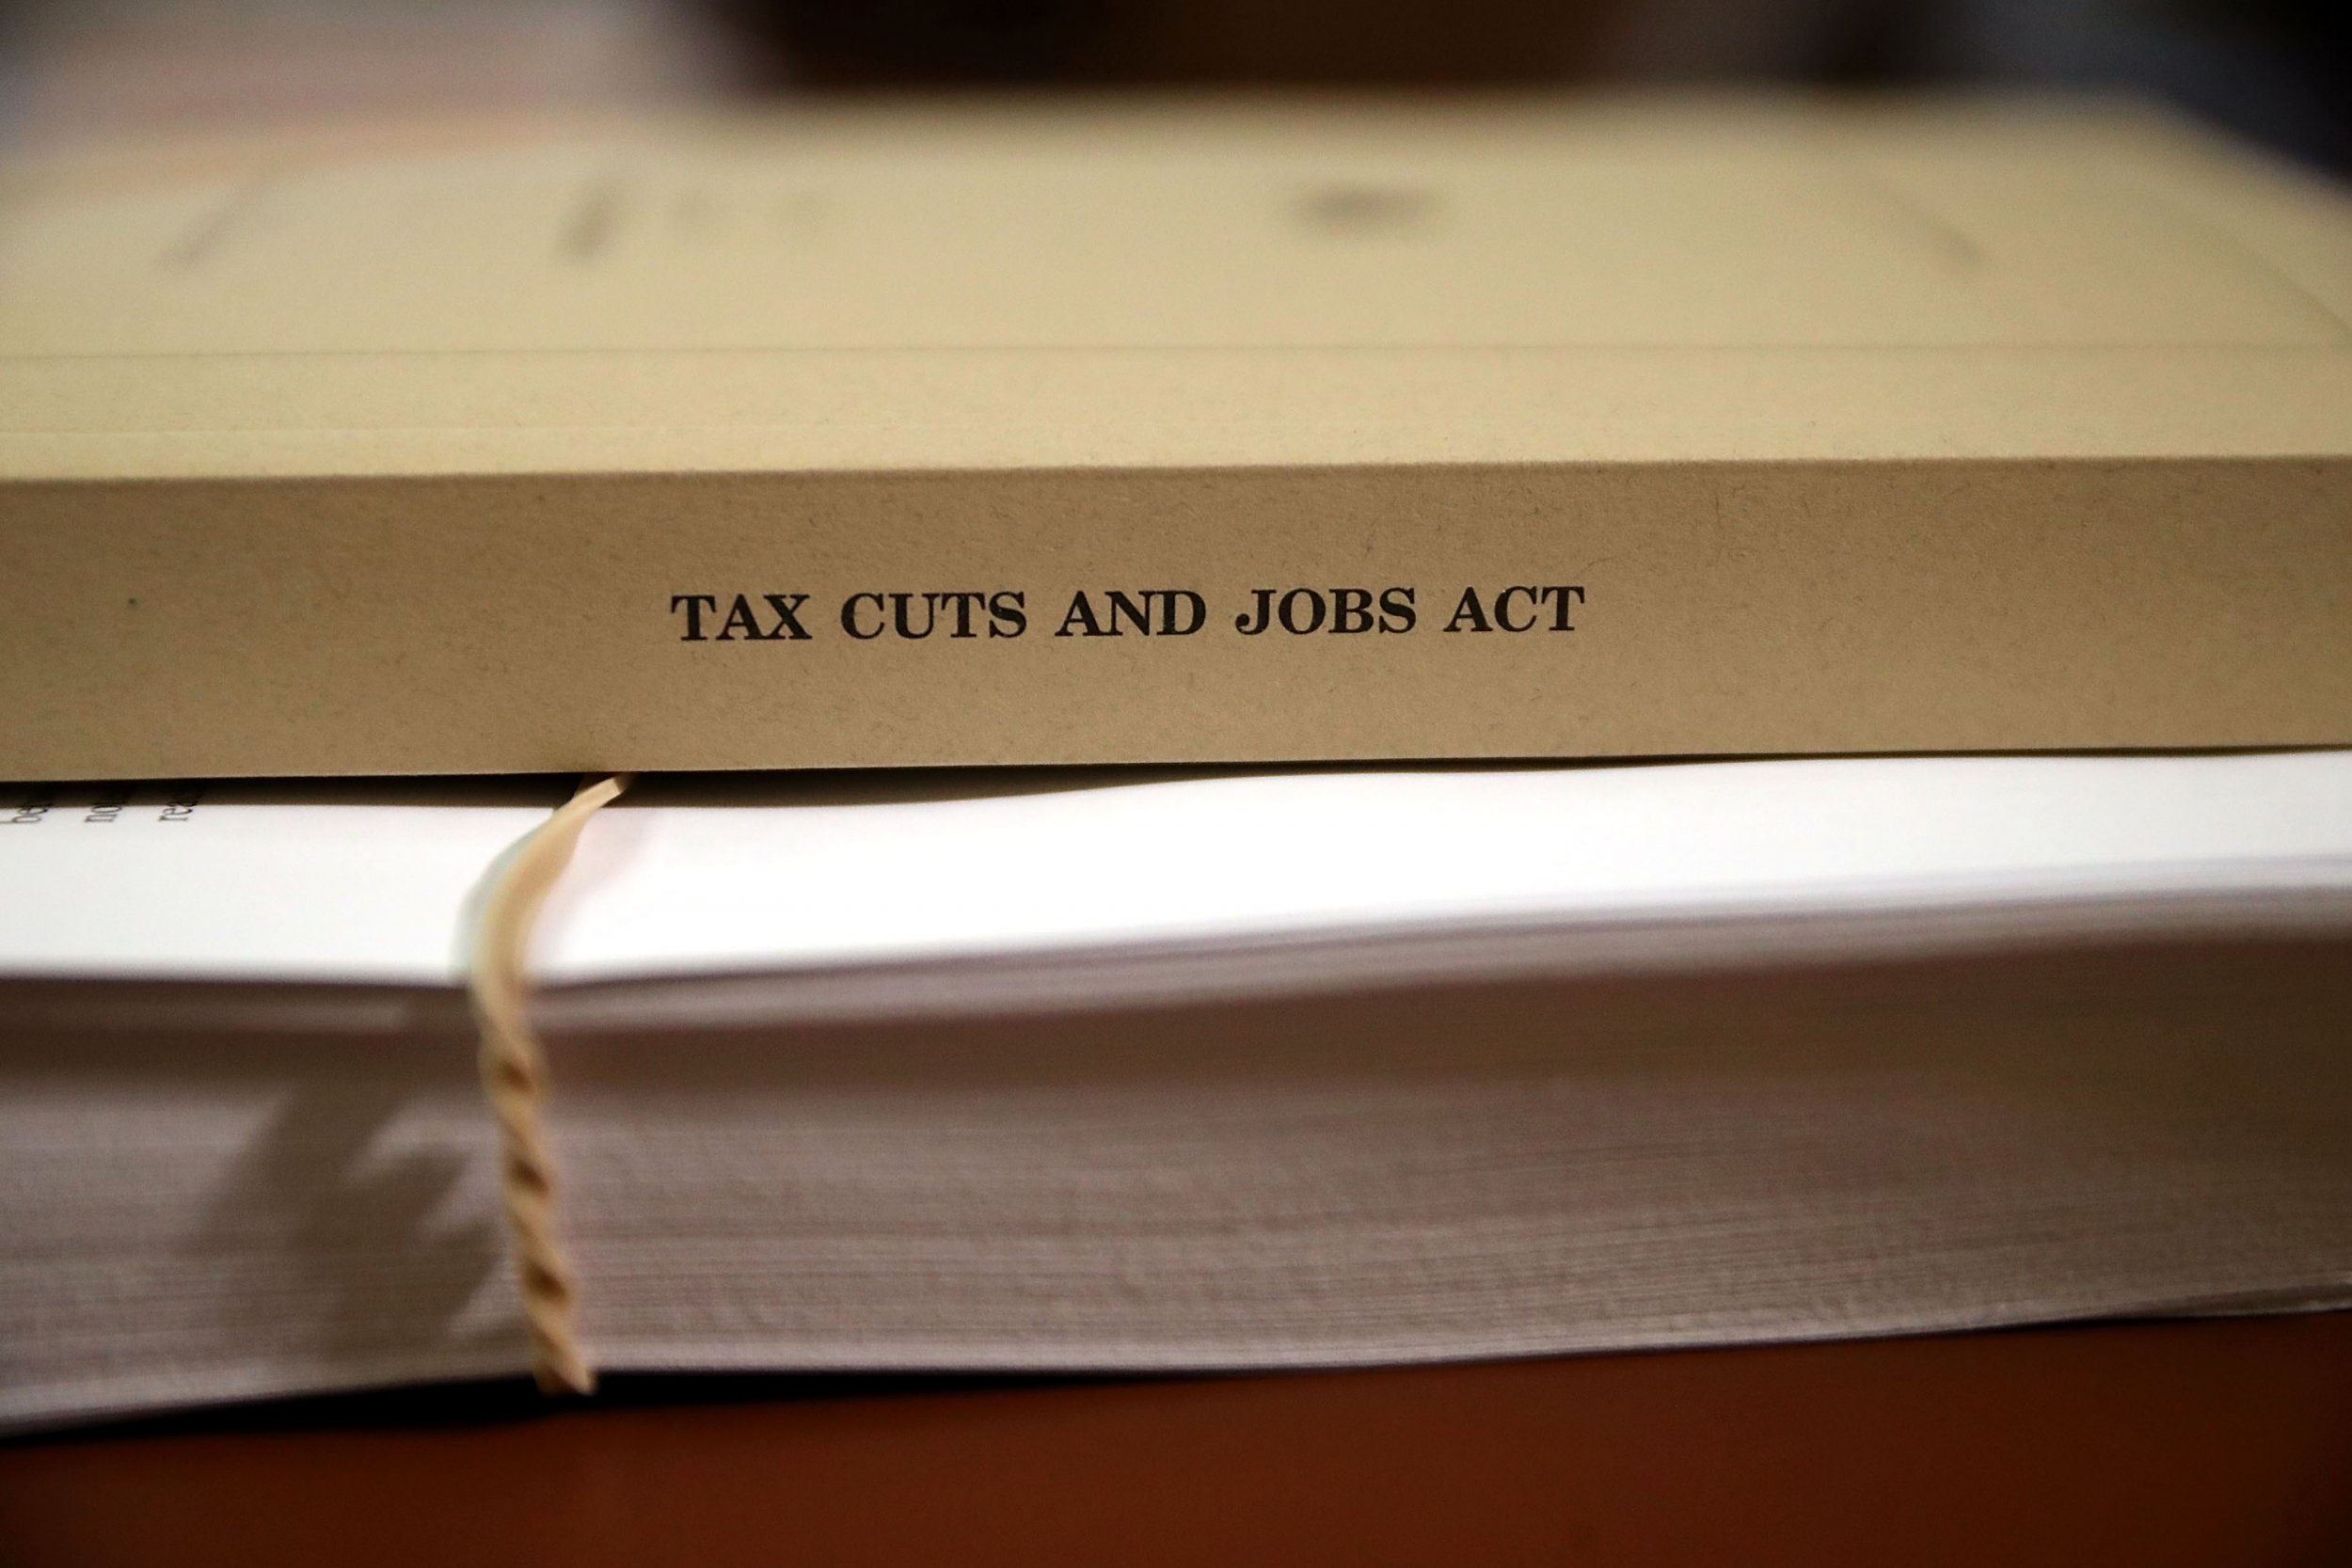 12_20_Tax Cuts and Jobs Act